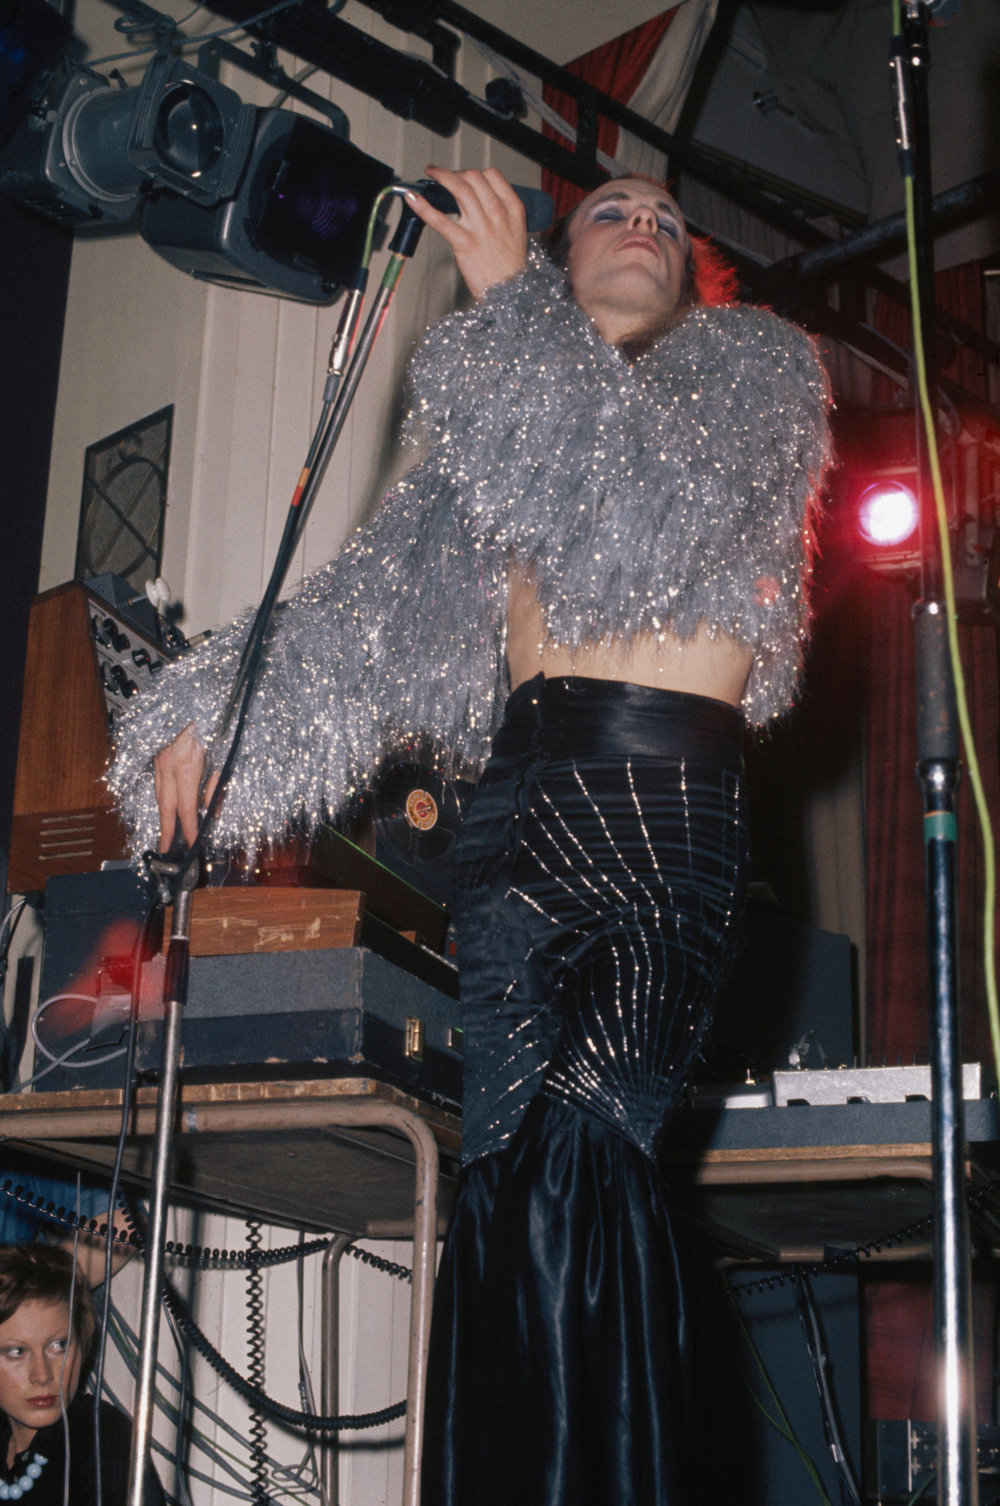 thisaintnomuddclub:Brian Eno performing on stage with Roxy Music to promote the album